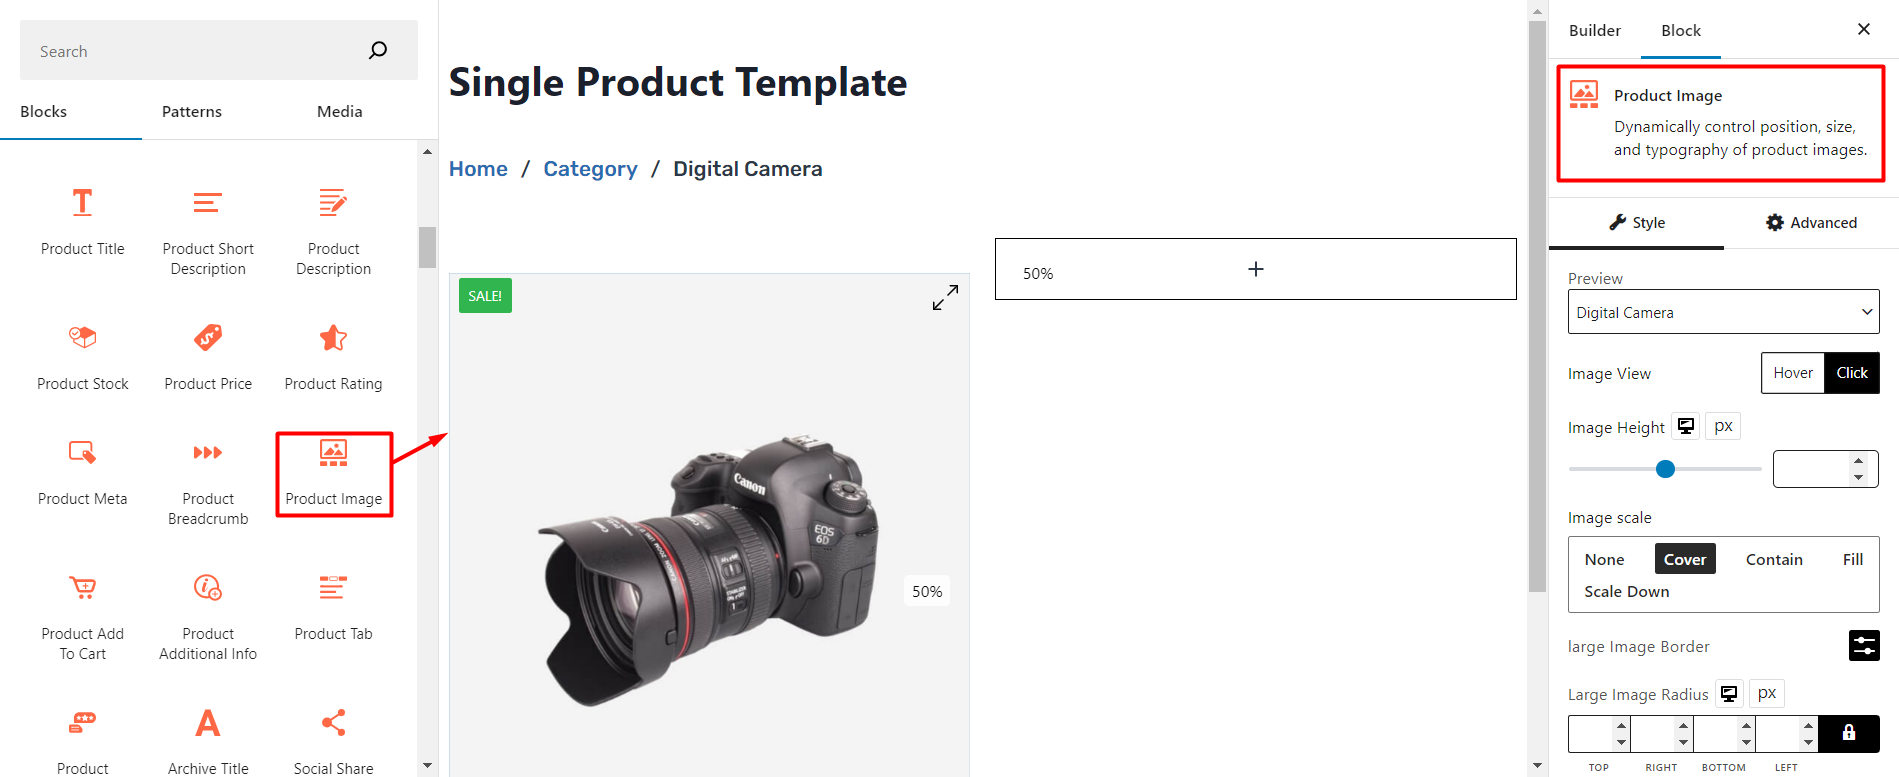 Adding a Product Image to the Template